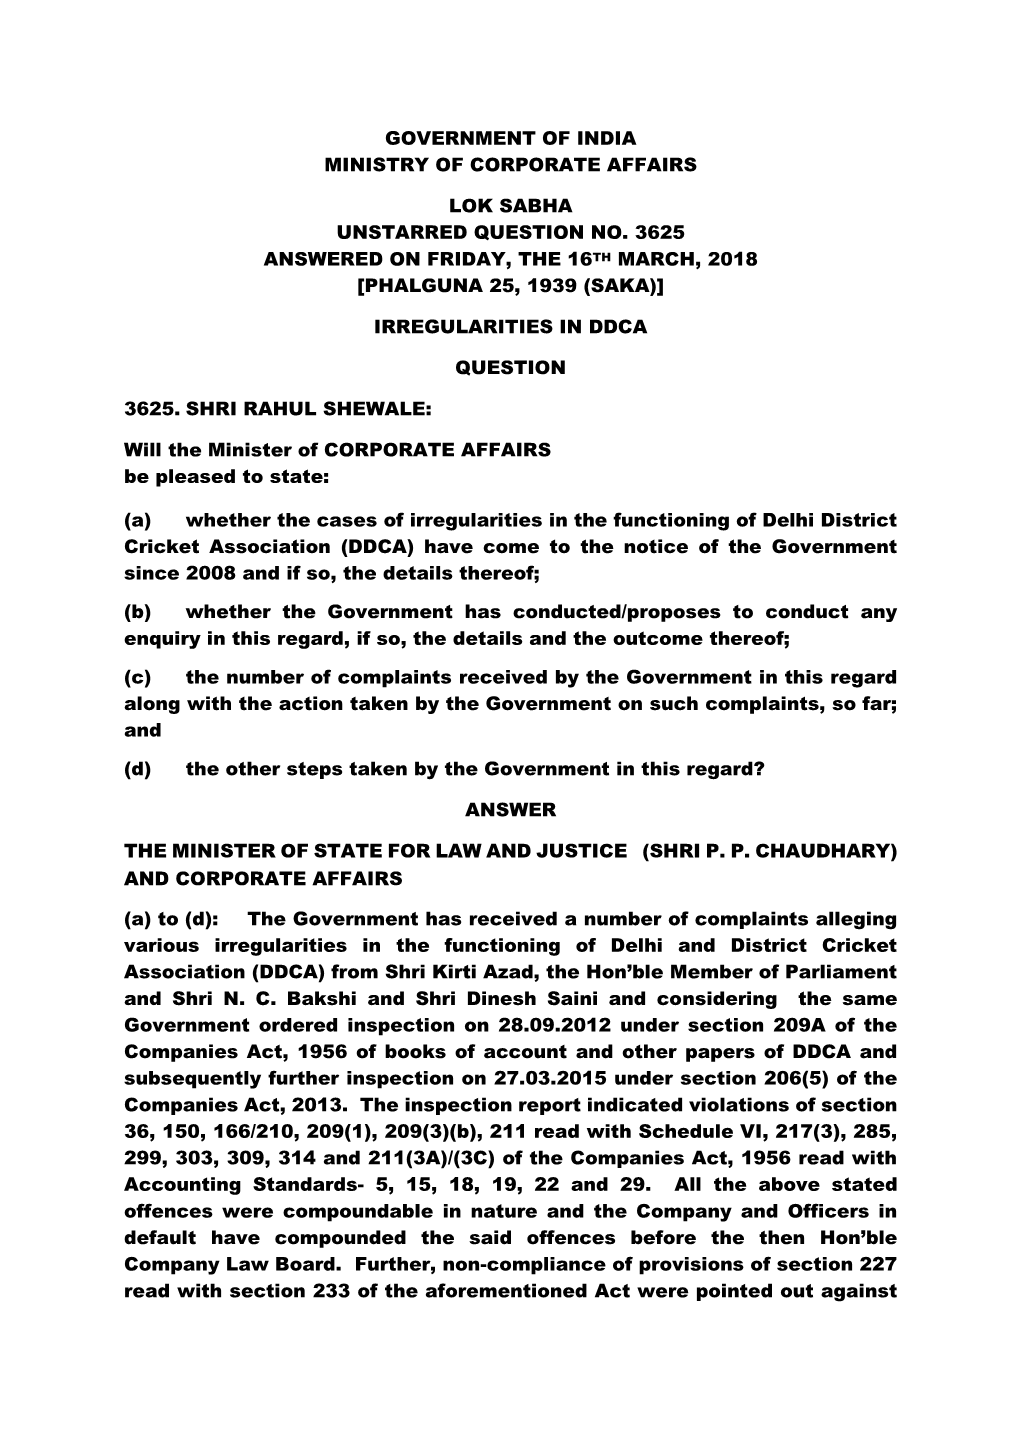 Government of India Ministry of Corporate Affairs Lok Sabha Unstarred Question No. 3625 Answered on Friday, the 16Th March, 2018